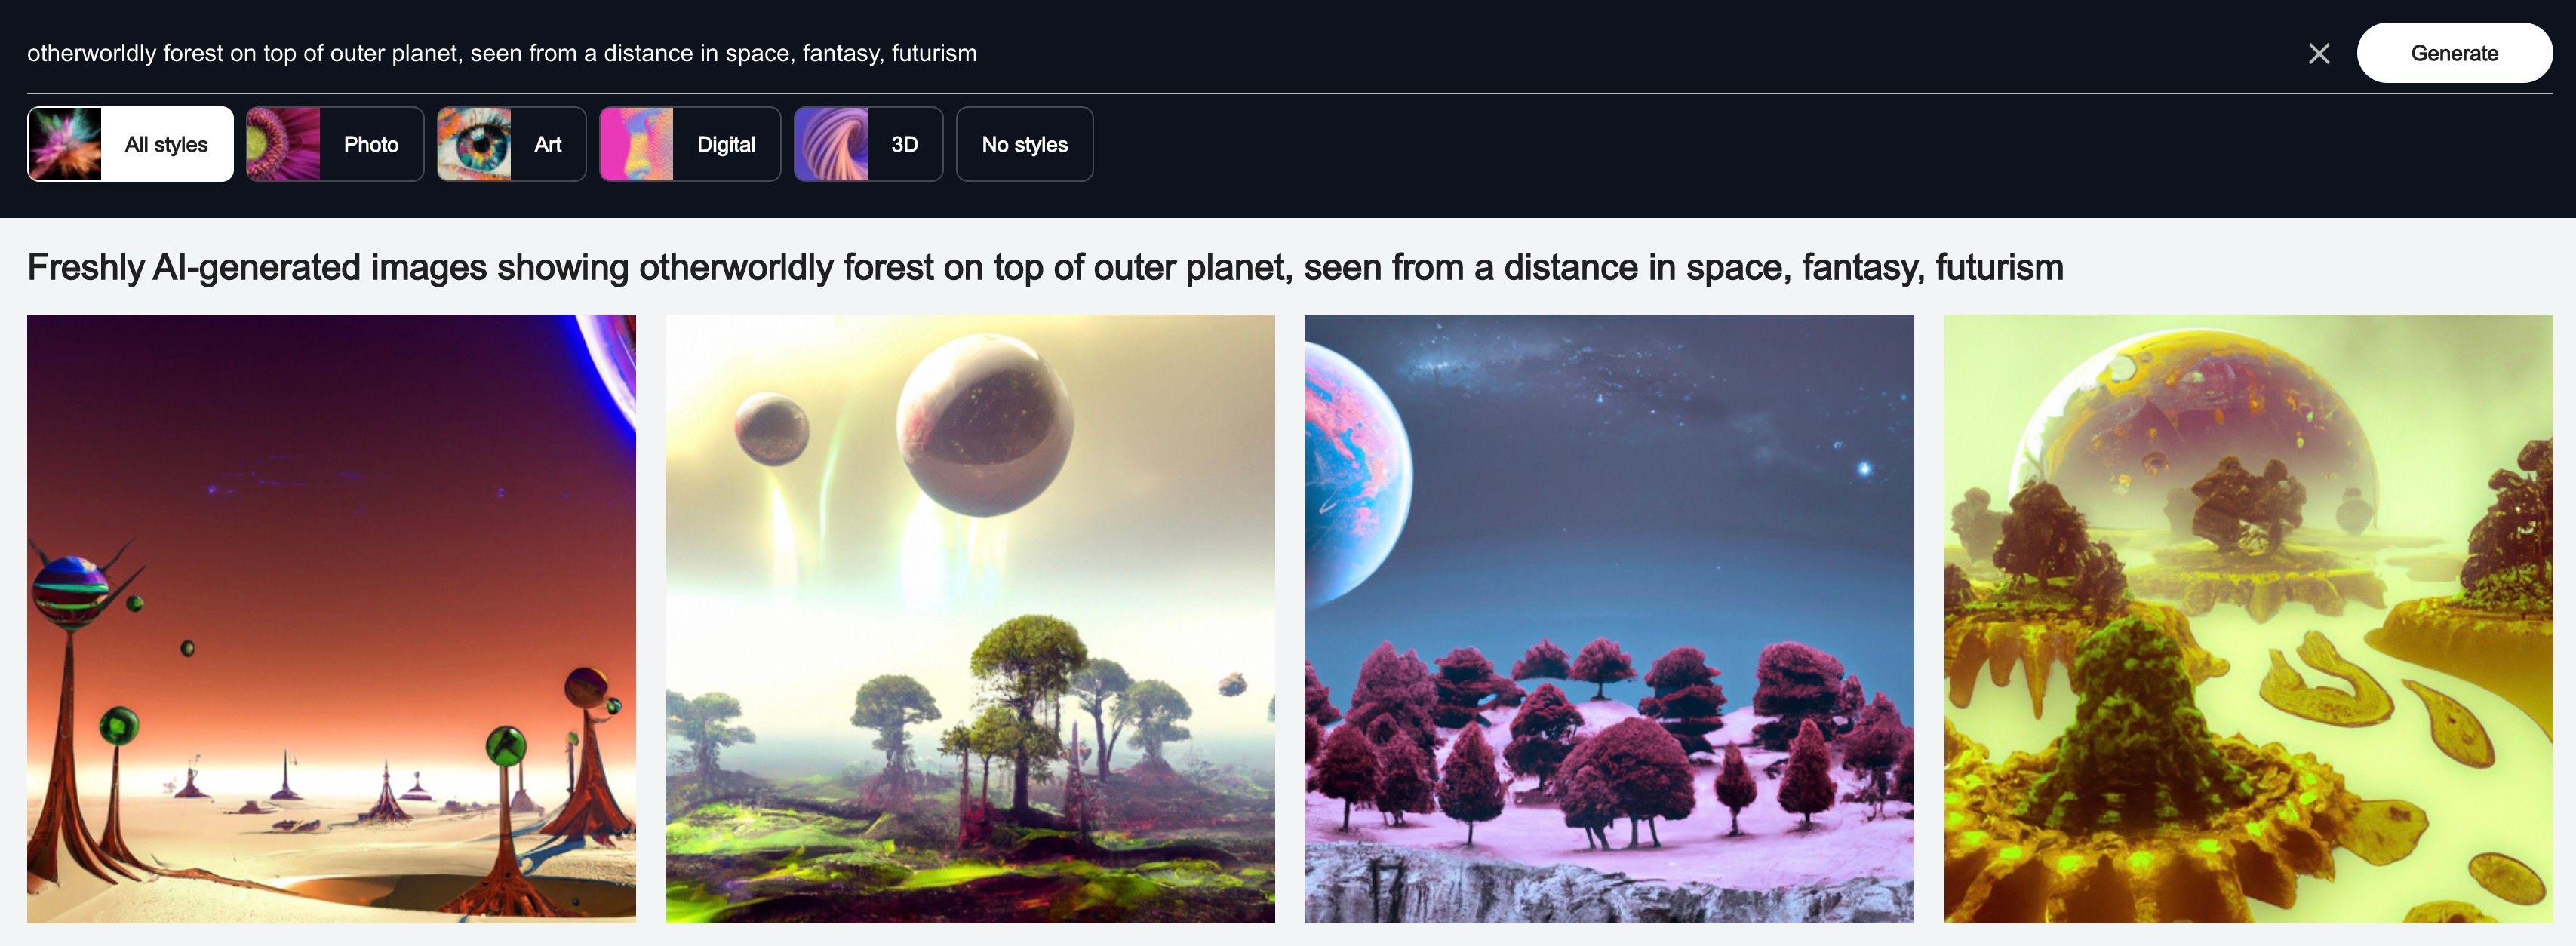 Four separate images of futuristic forests generated with AI